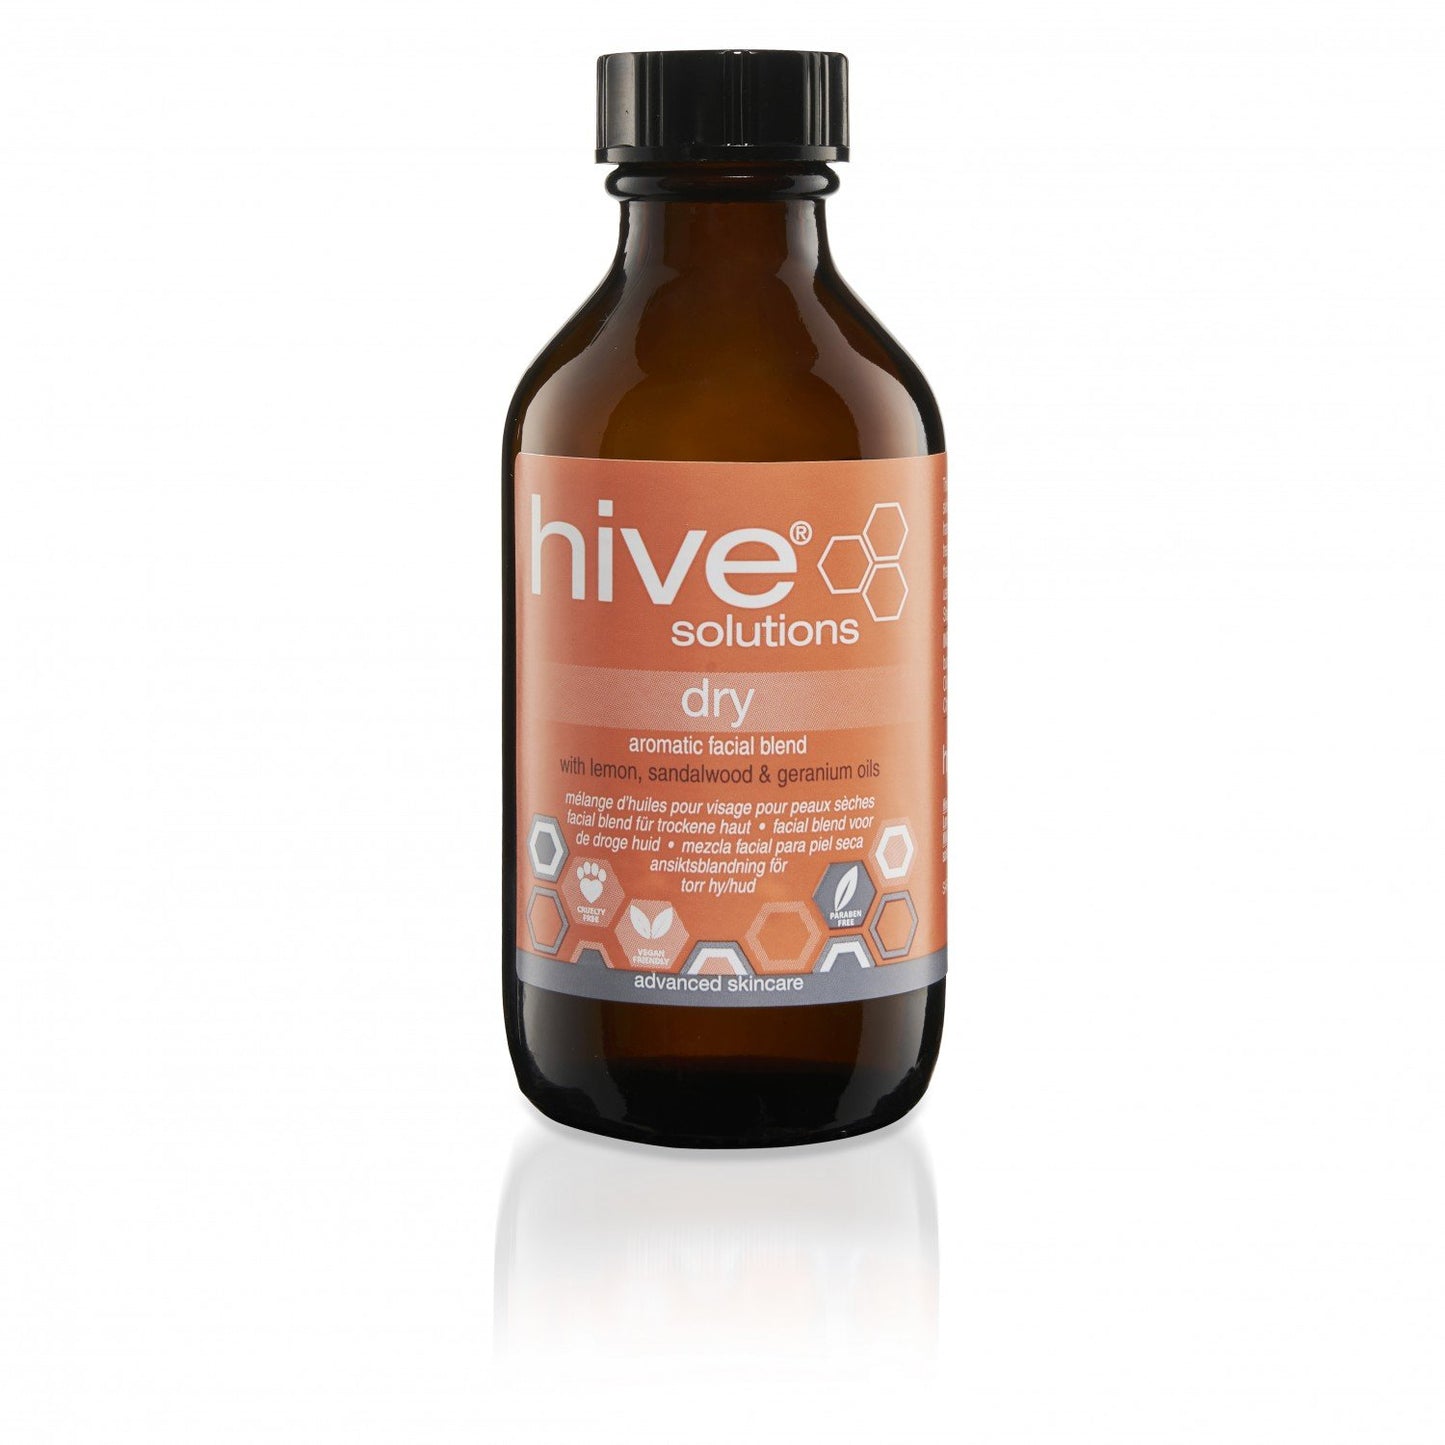 Hive Simply Aromatic Facial Blend (Dry) 75ml (SHOP)